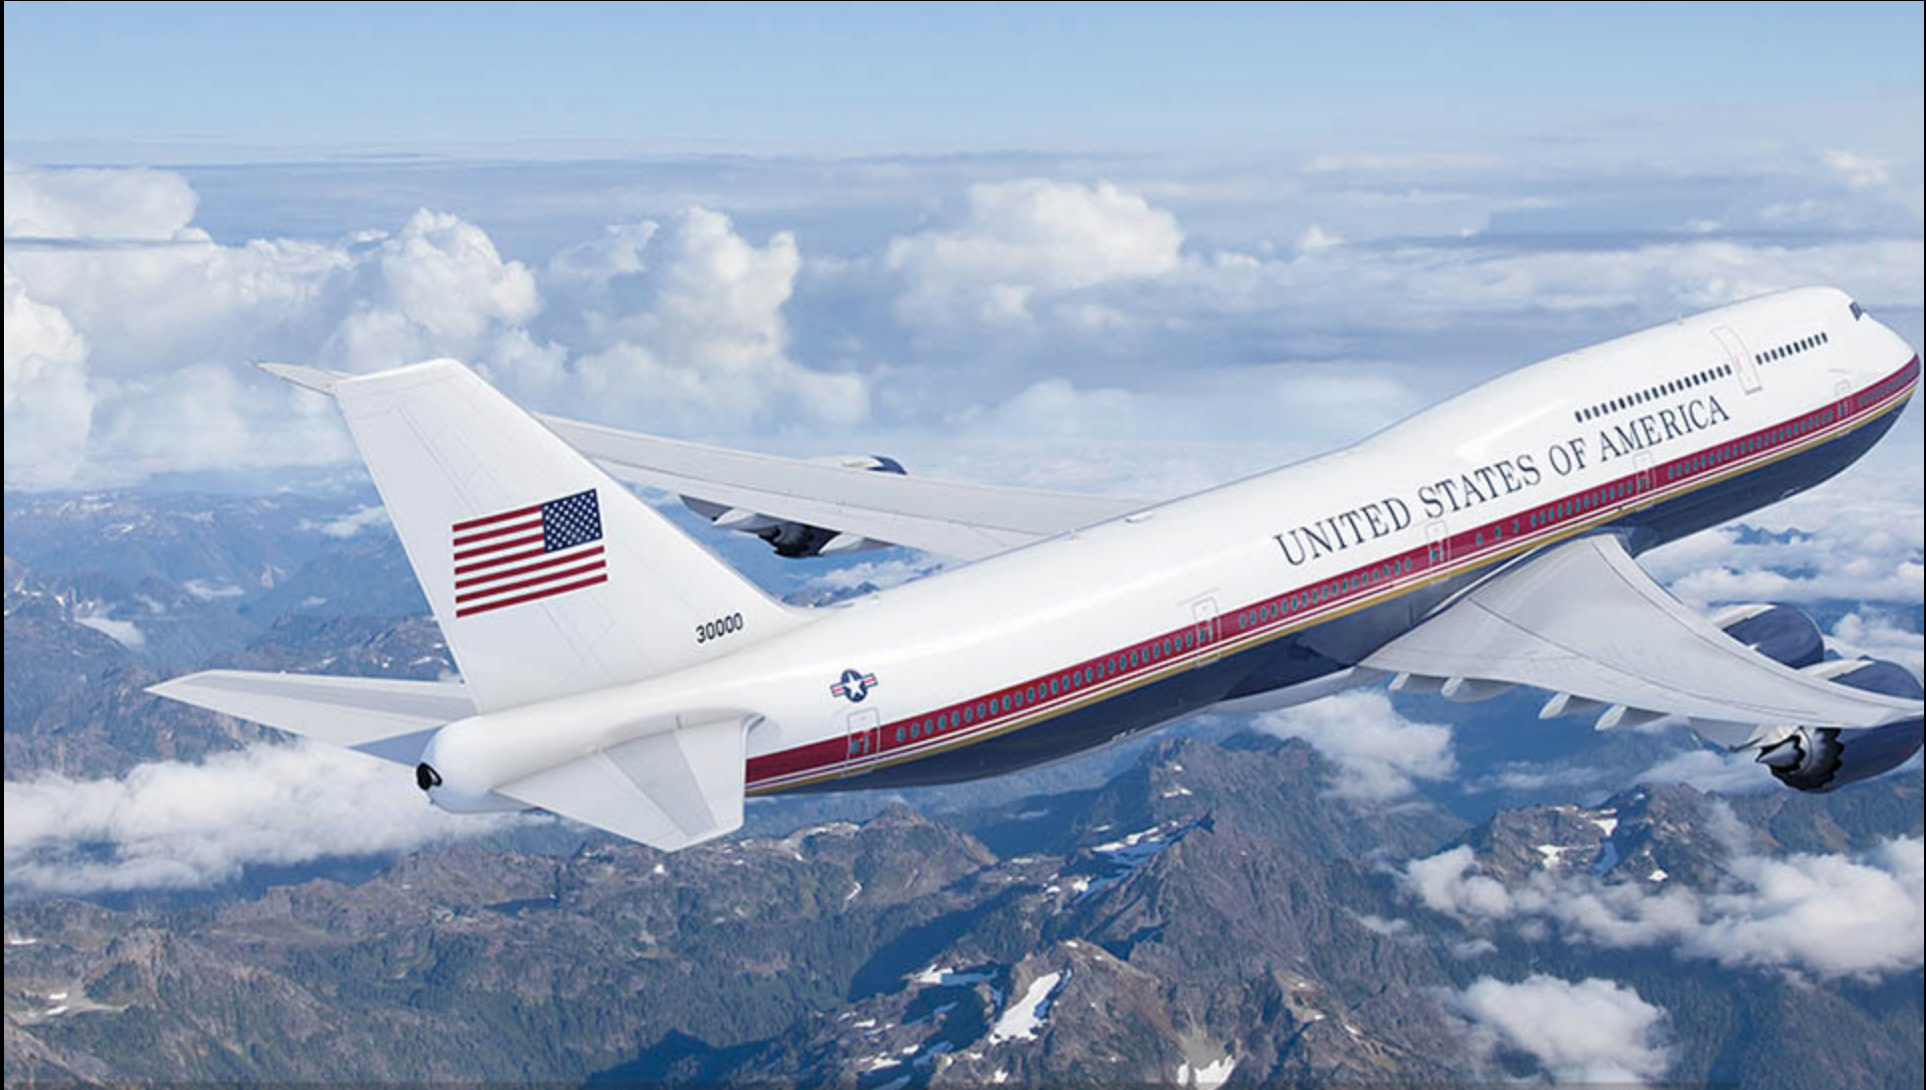 Boeing In The Red On Air Force One Deal - AVweb